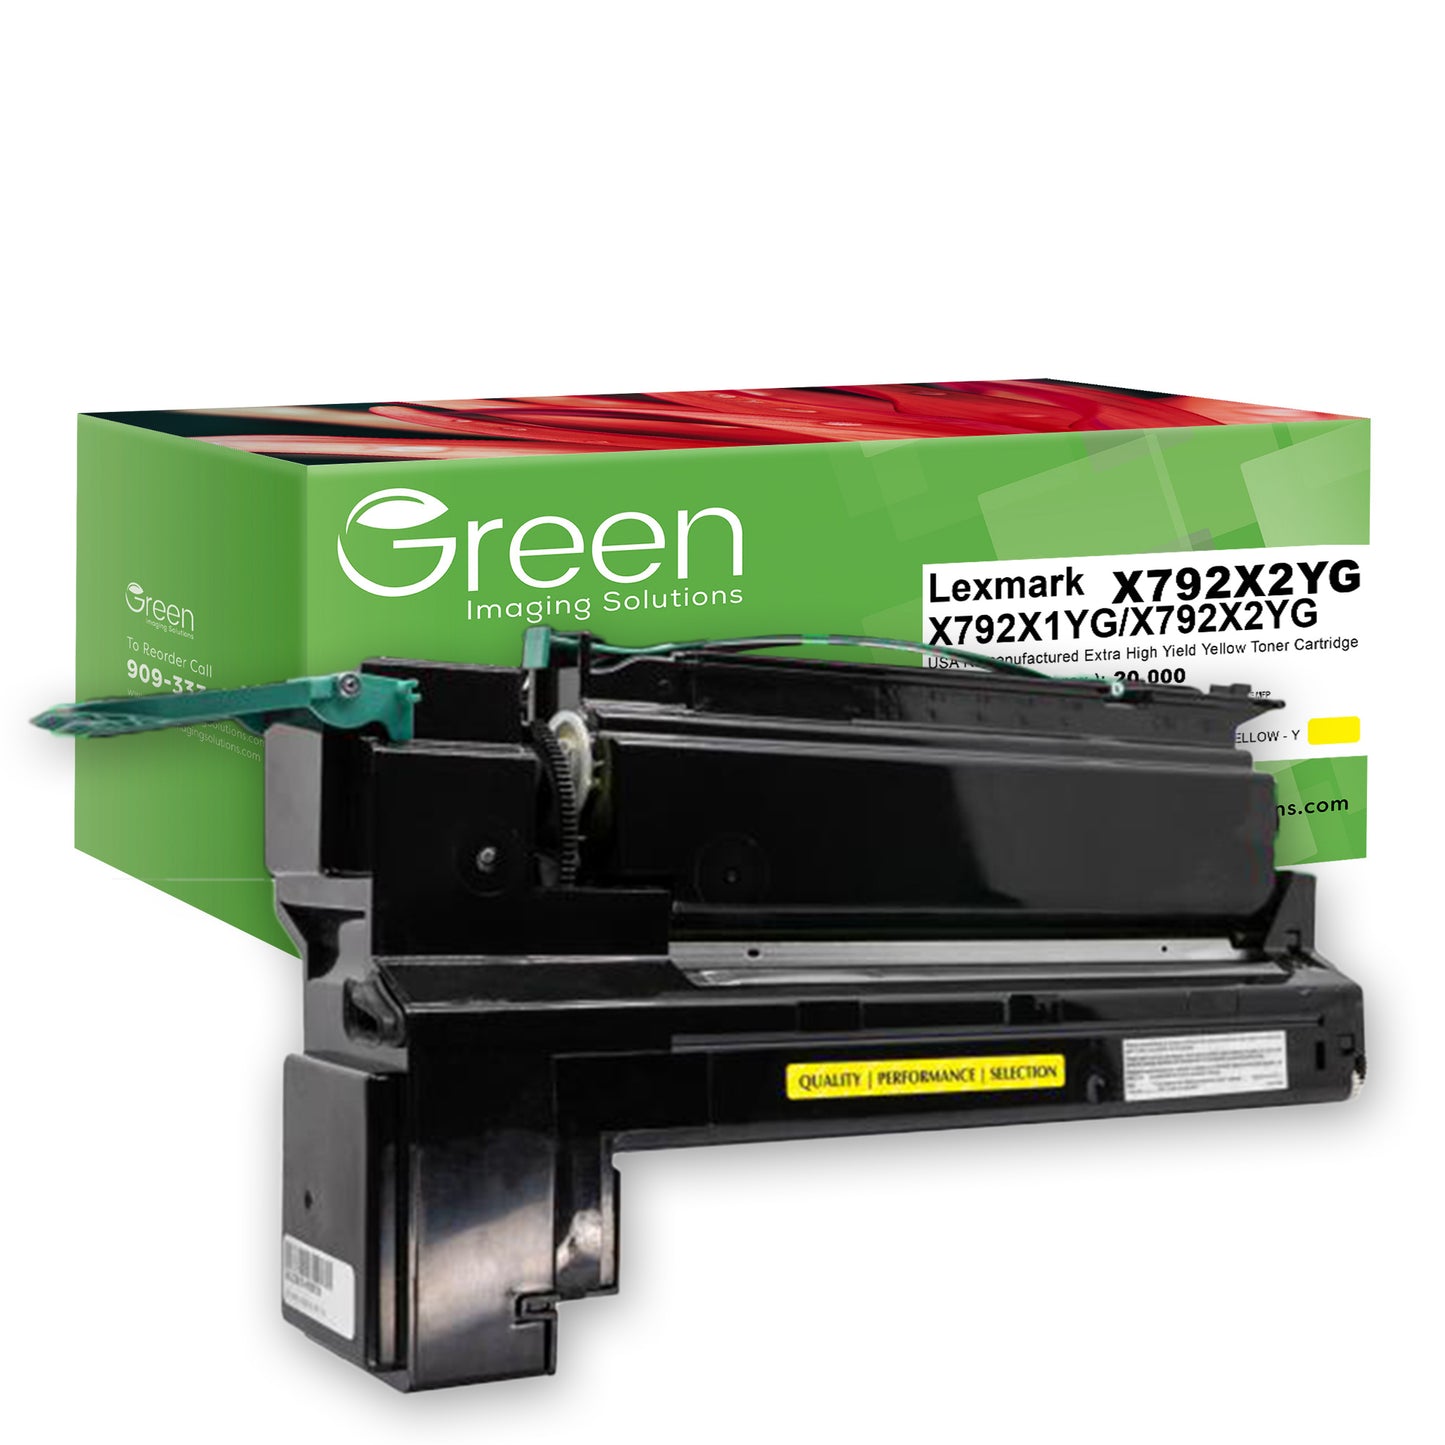 Green Imaging Solutions USA Remanufactured Extra High Yield Yellow Toner Cartridge for Lexmark X792